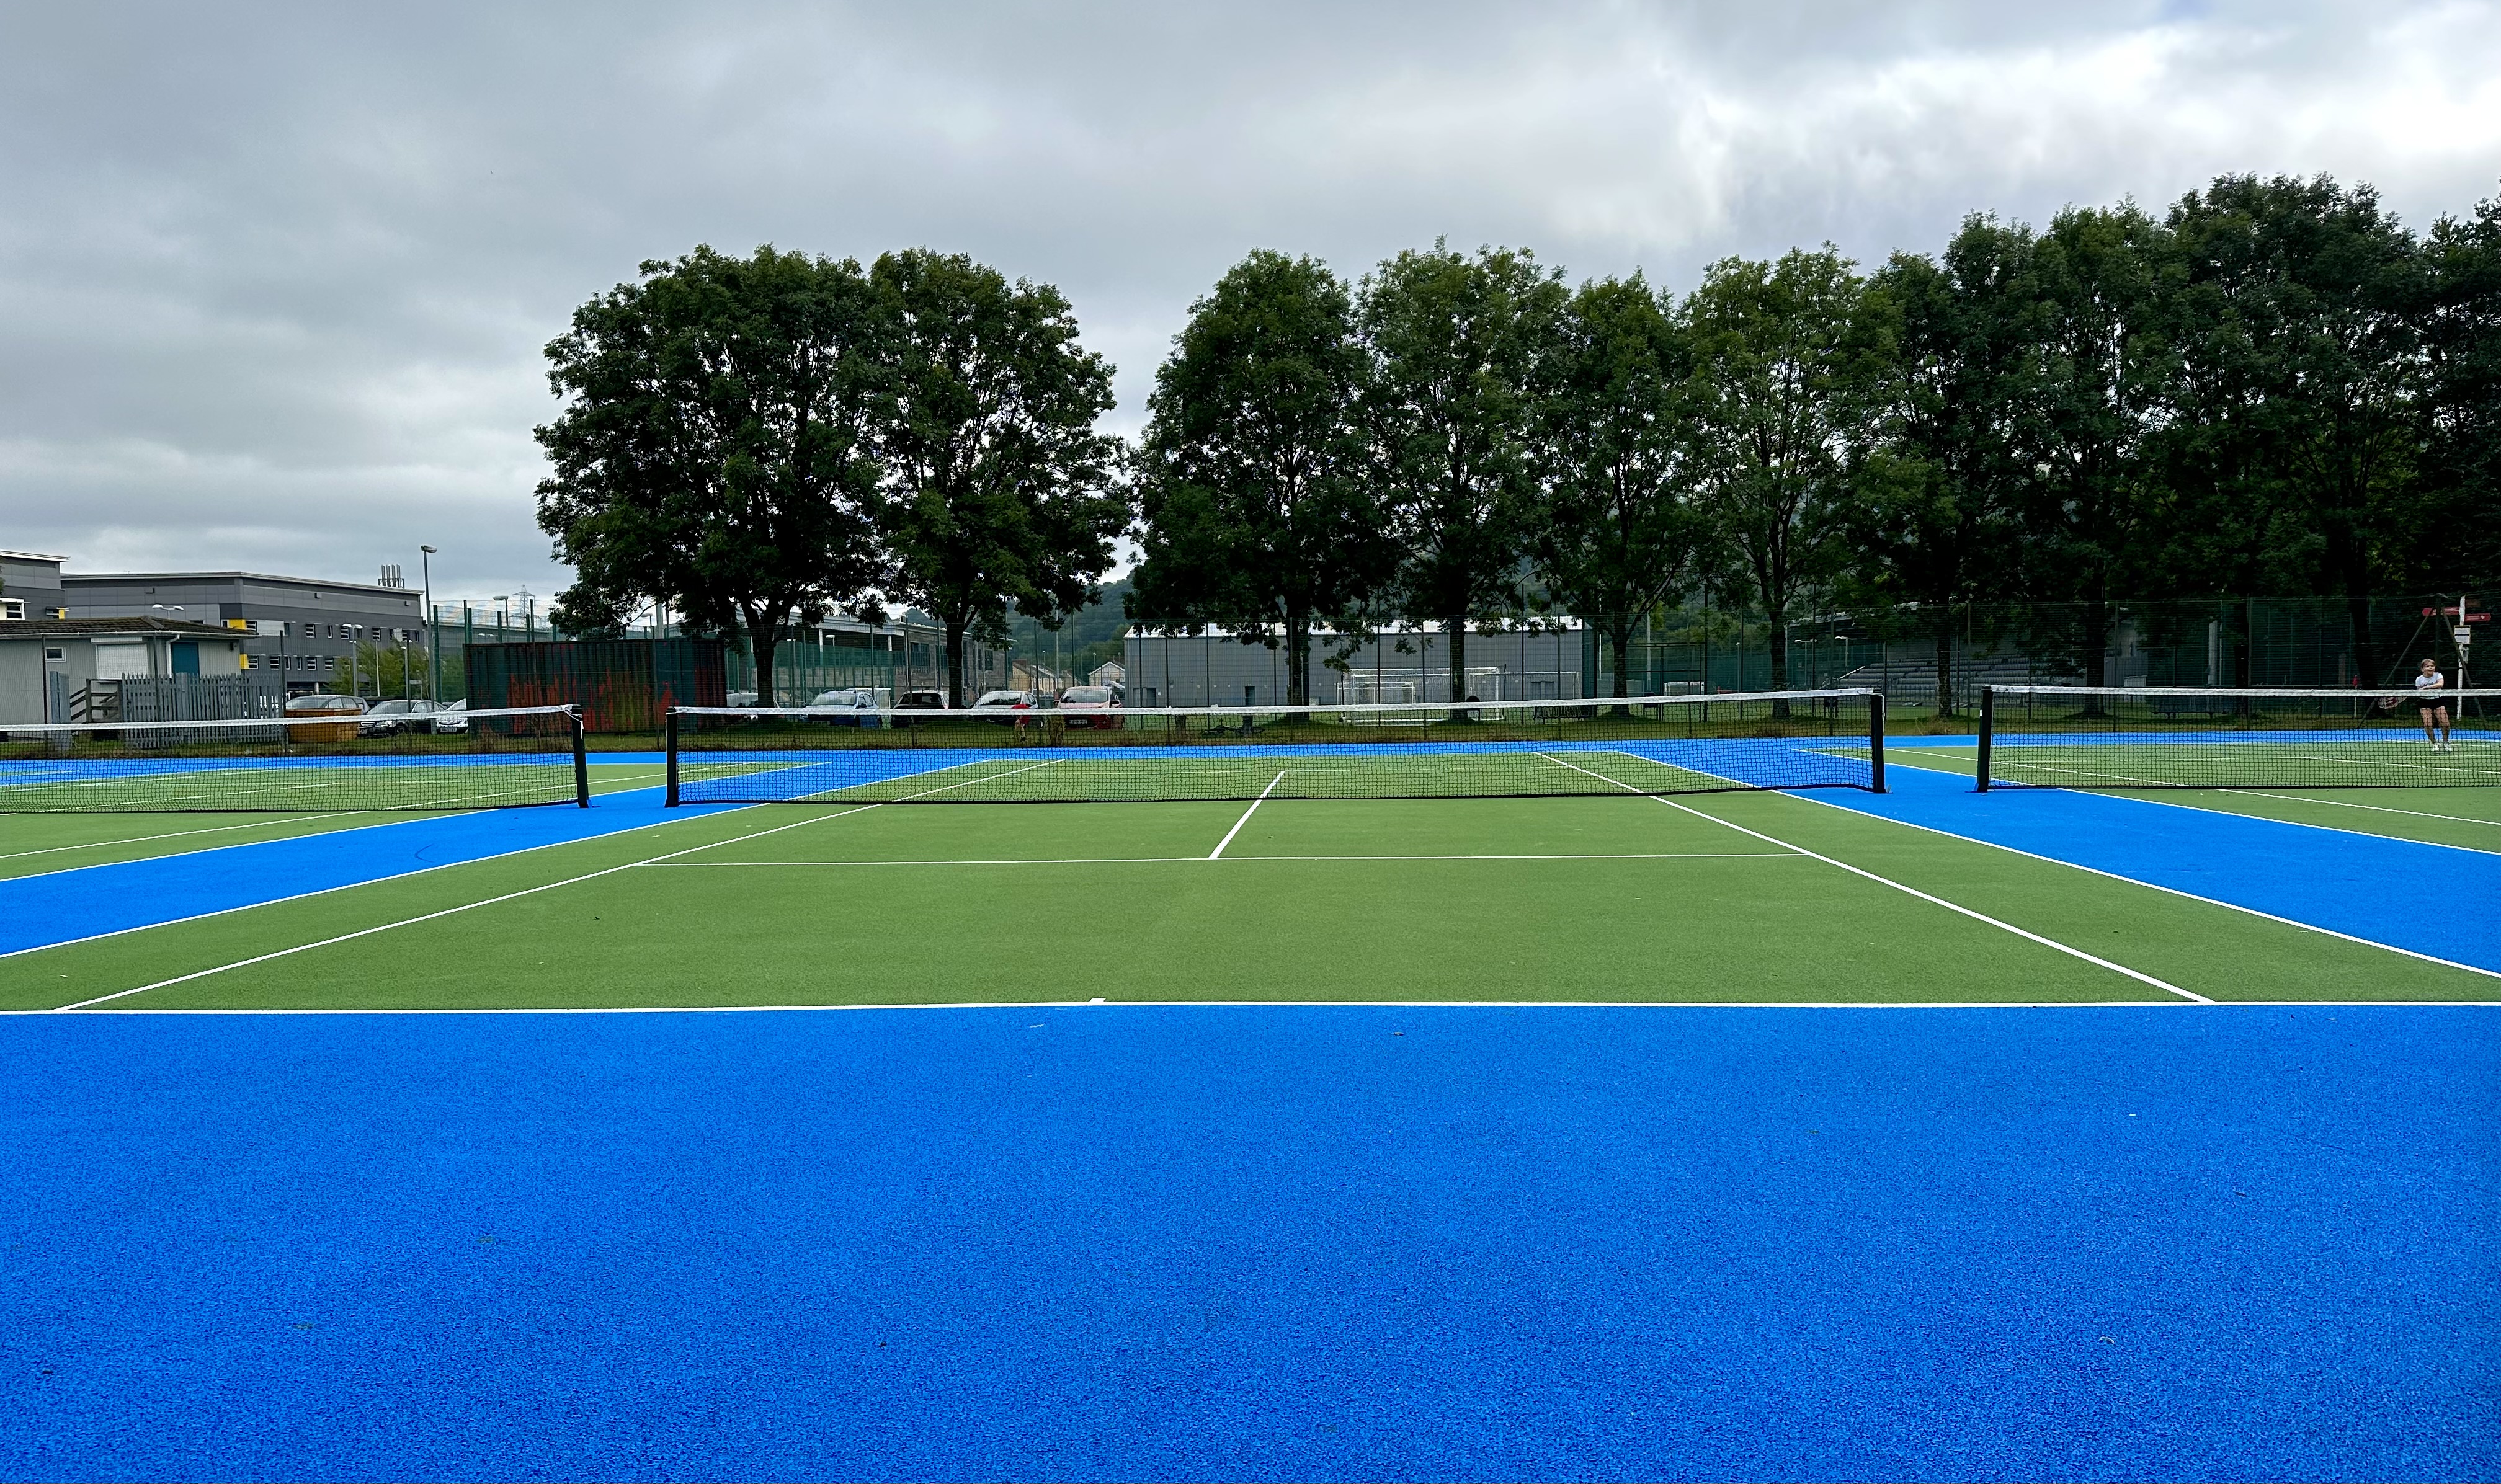 Local park tennis courts in Caerphilly County Borough set for renovation